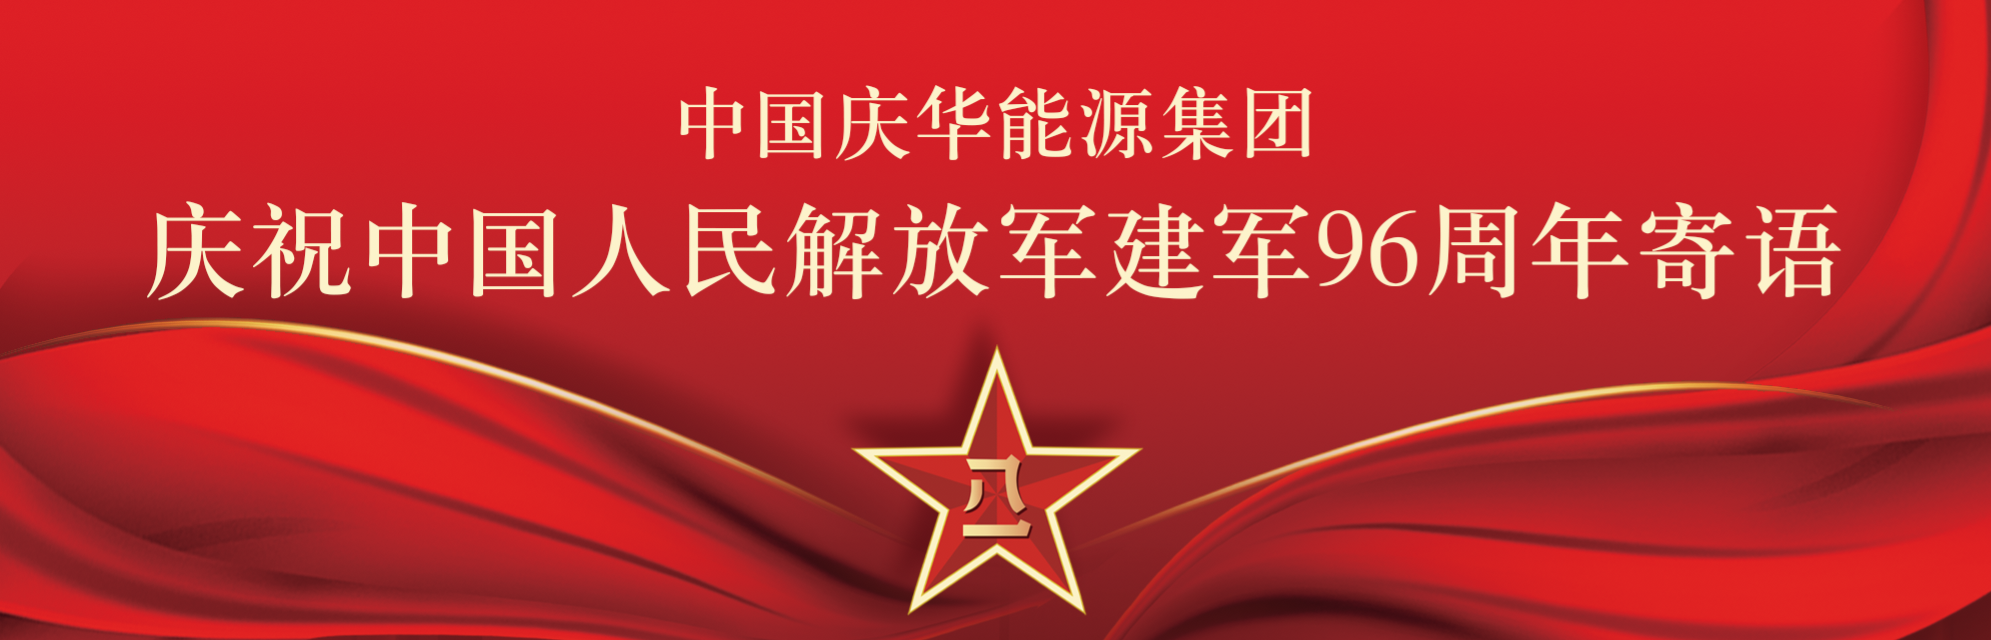 http://www.chinakingho.com/media/images/20230730/20230730092004_9148.png